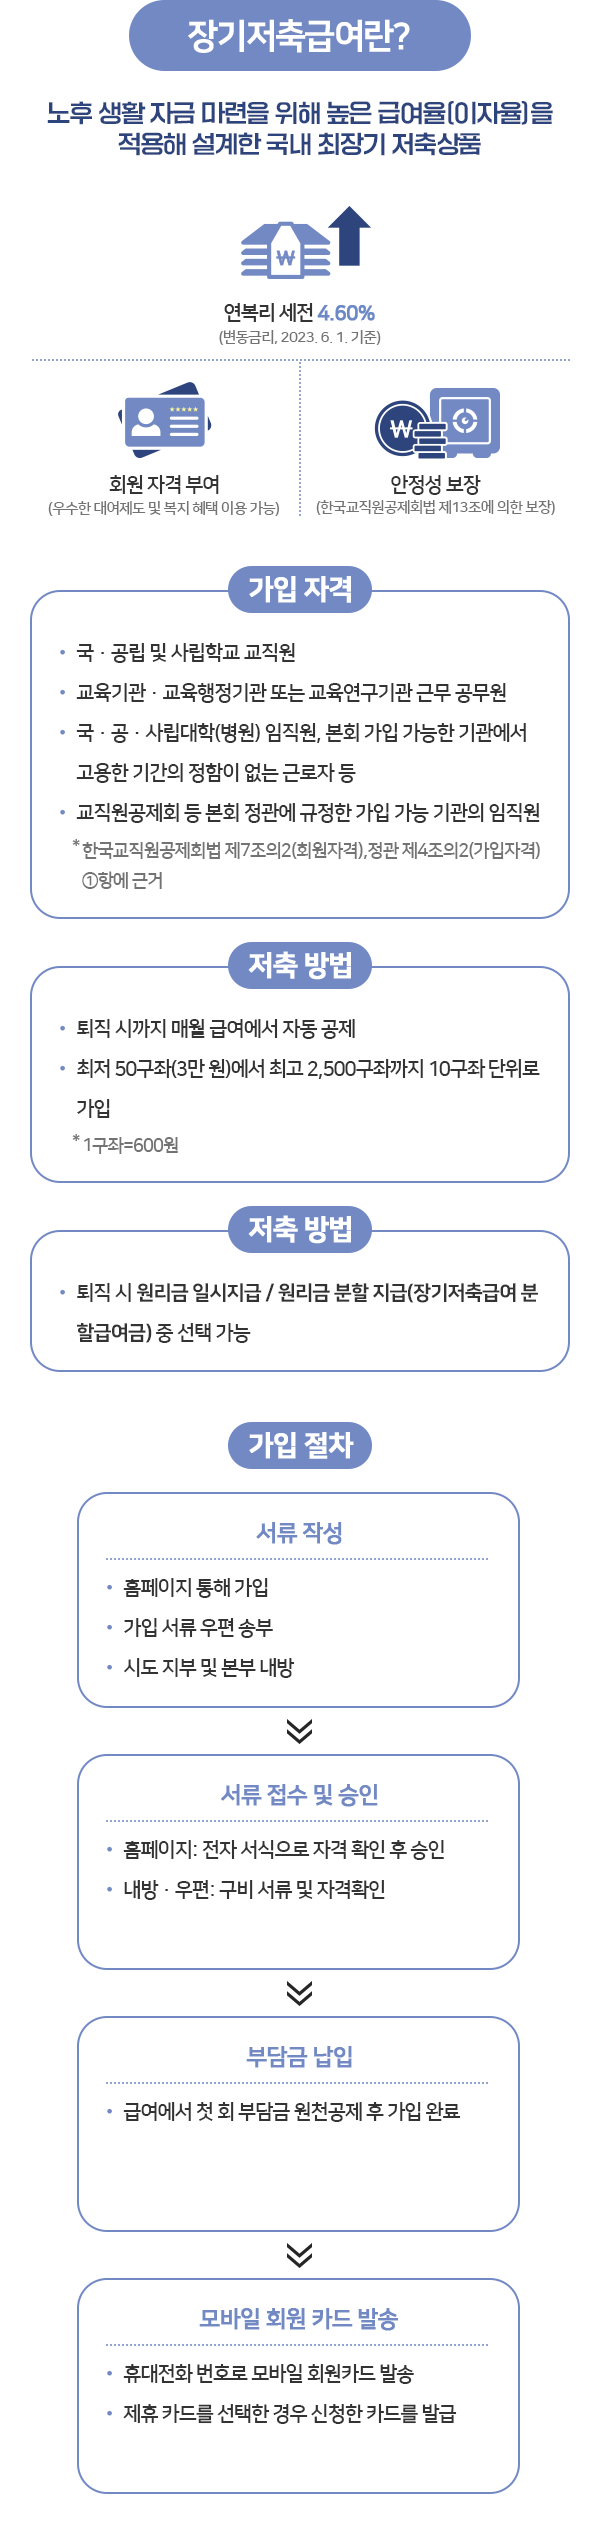 The-K 포커스 1_01